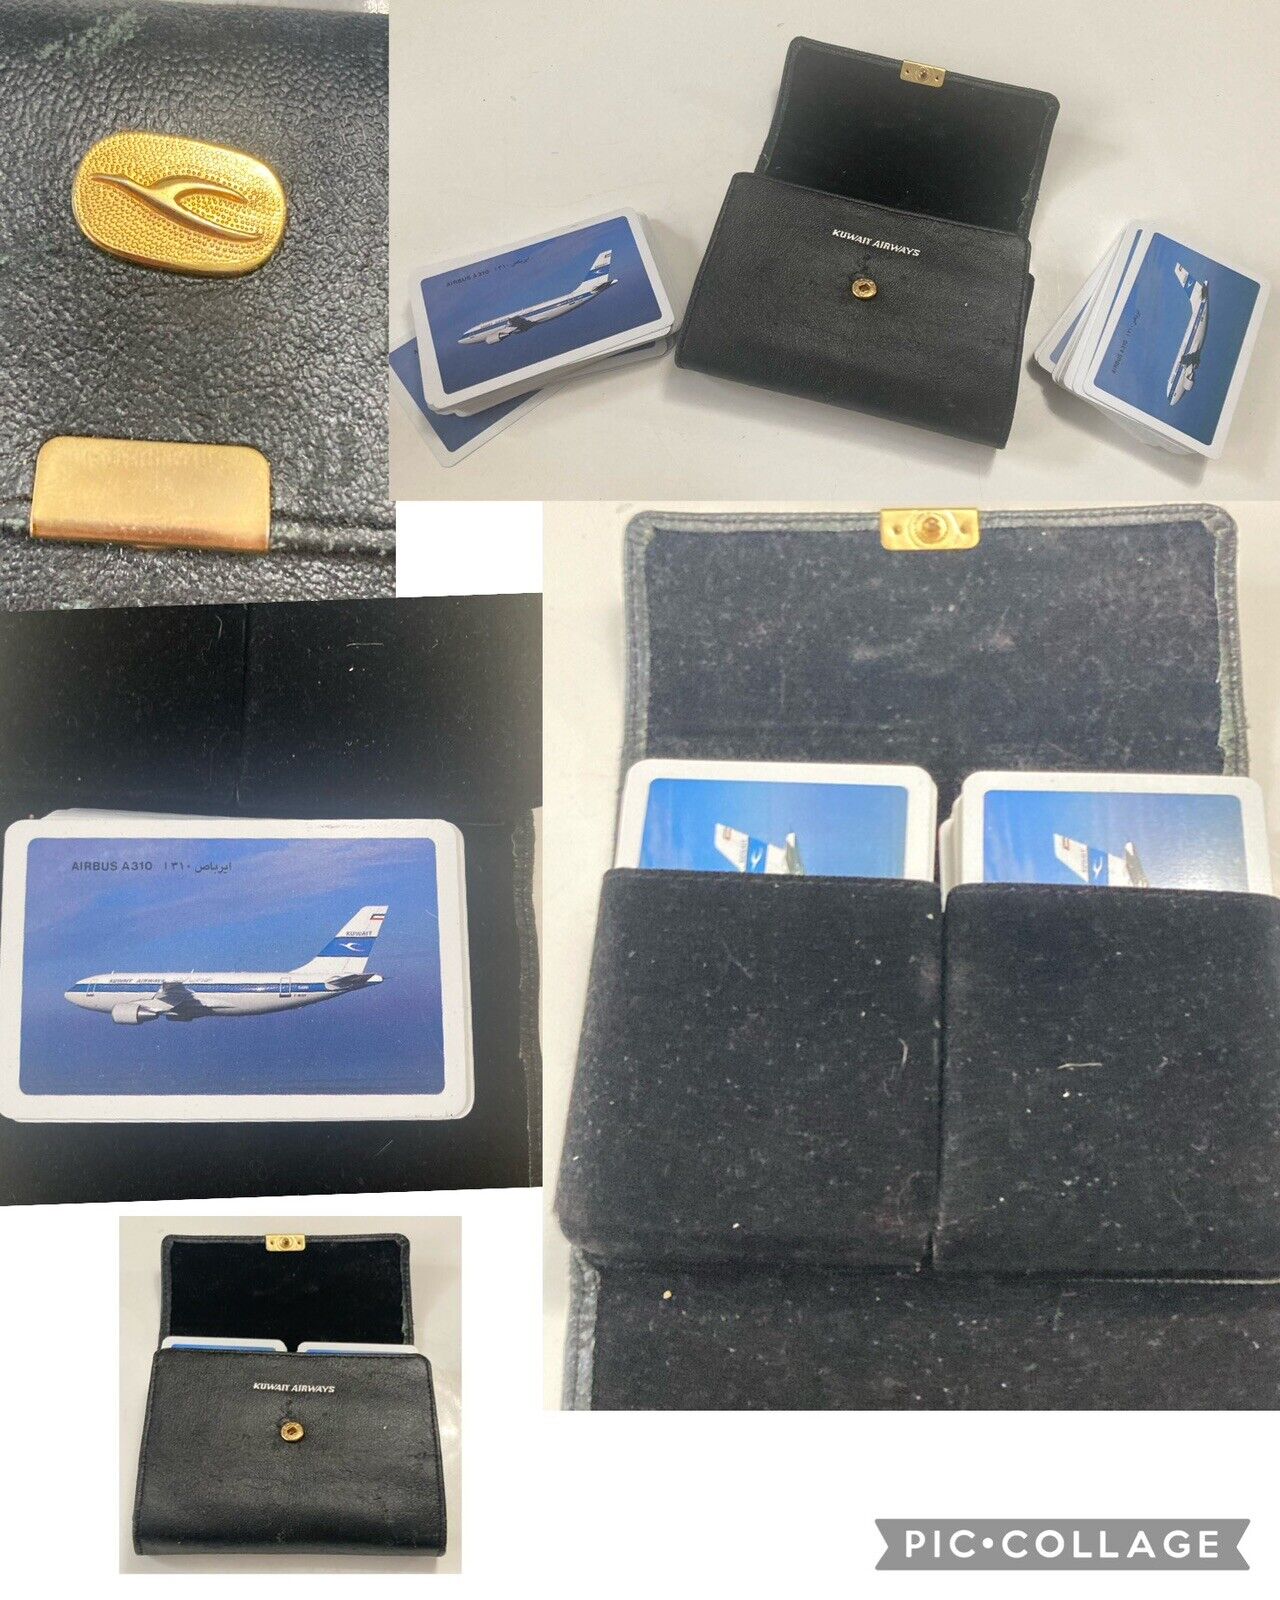 Kuwait Airways Airbus A300 First Class 2 Decks Playing Cards in Carrying Case